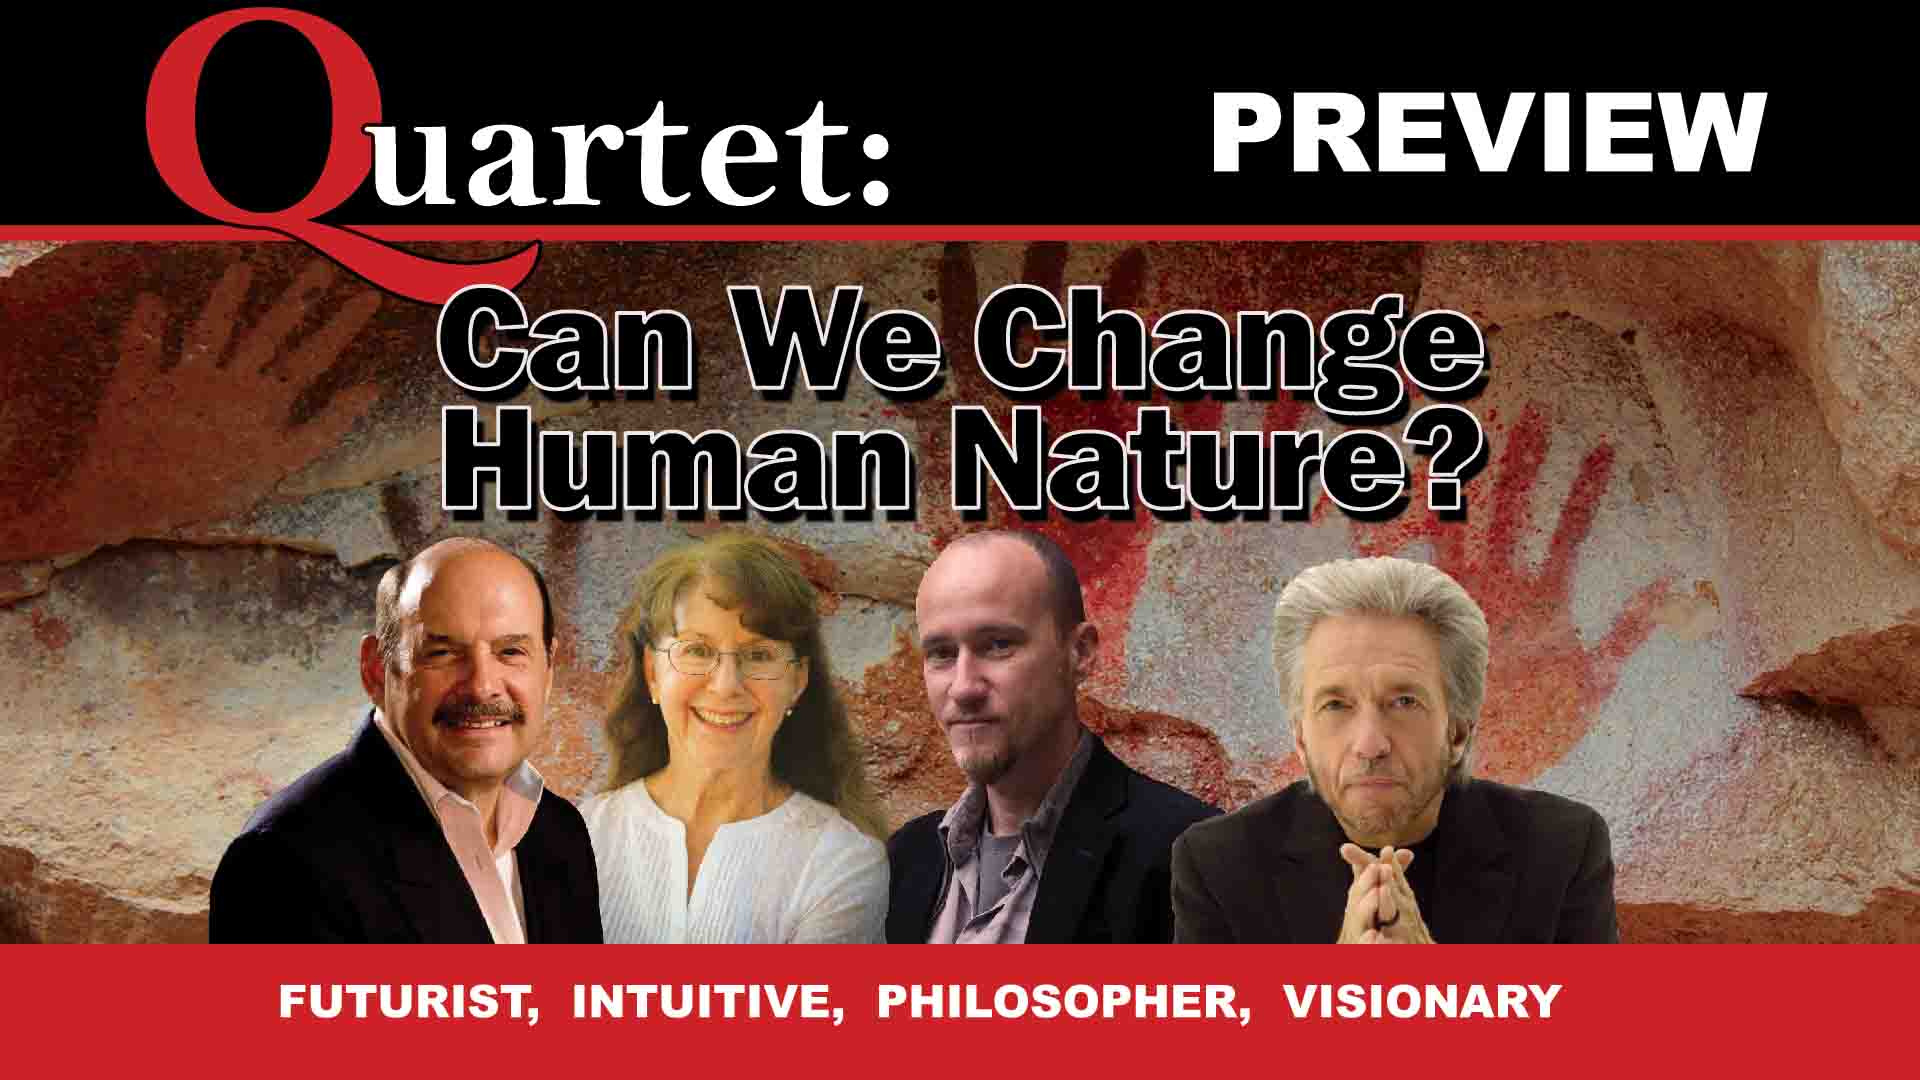 Quartet preview, can we change human nature?